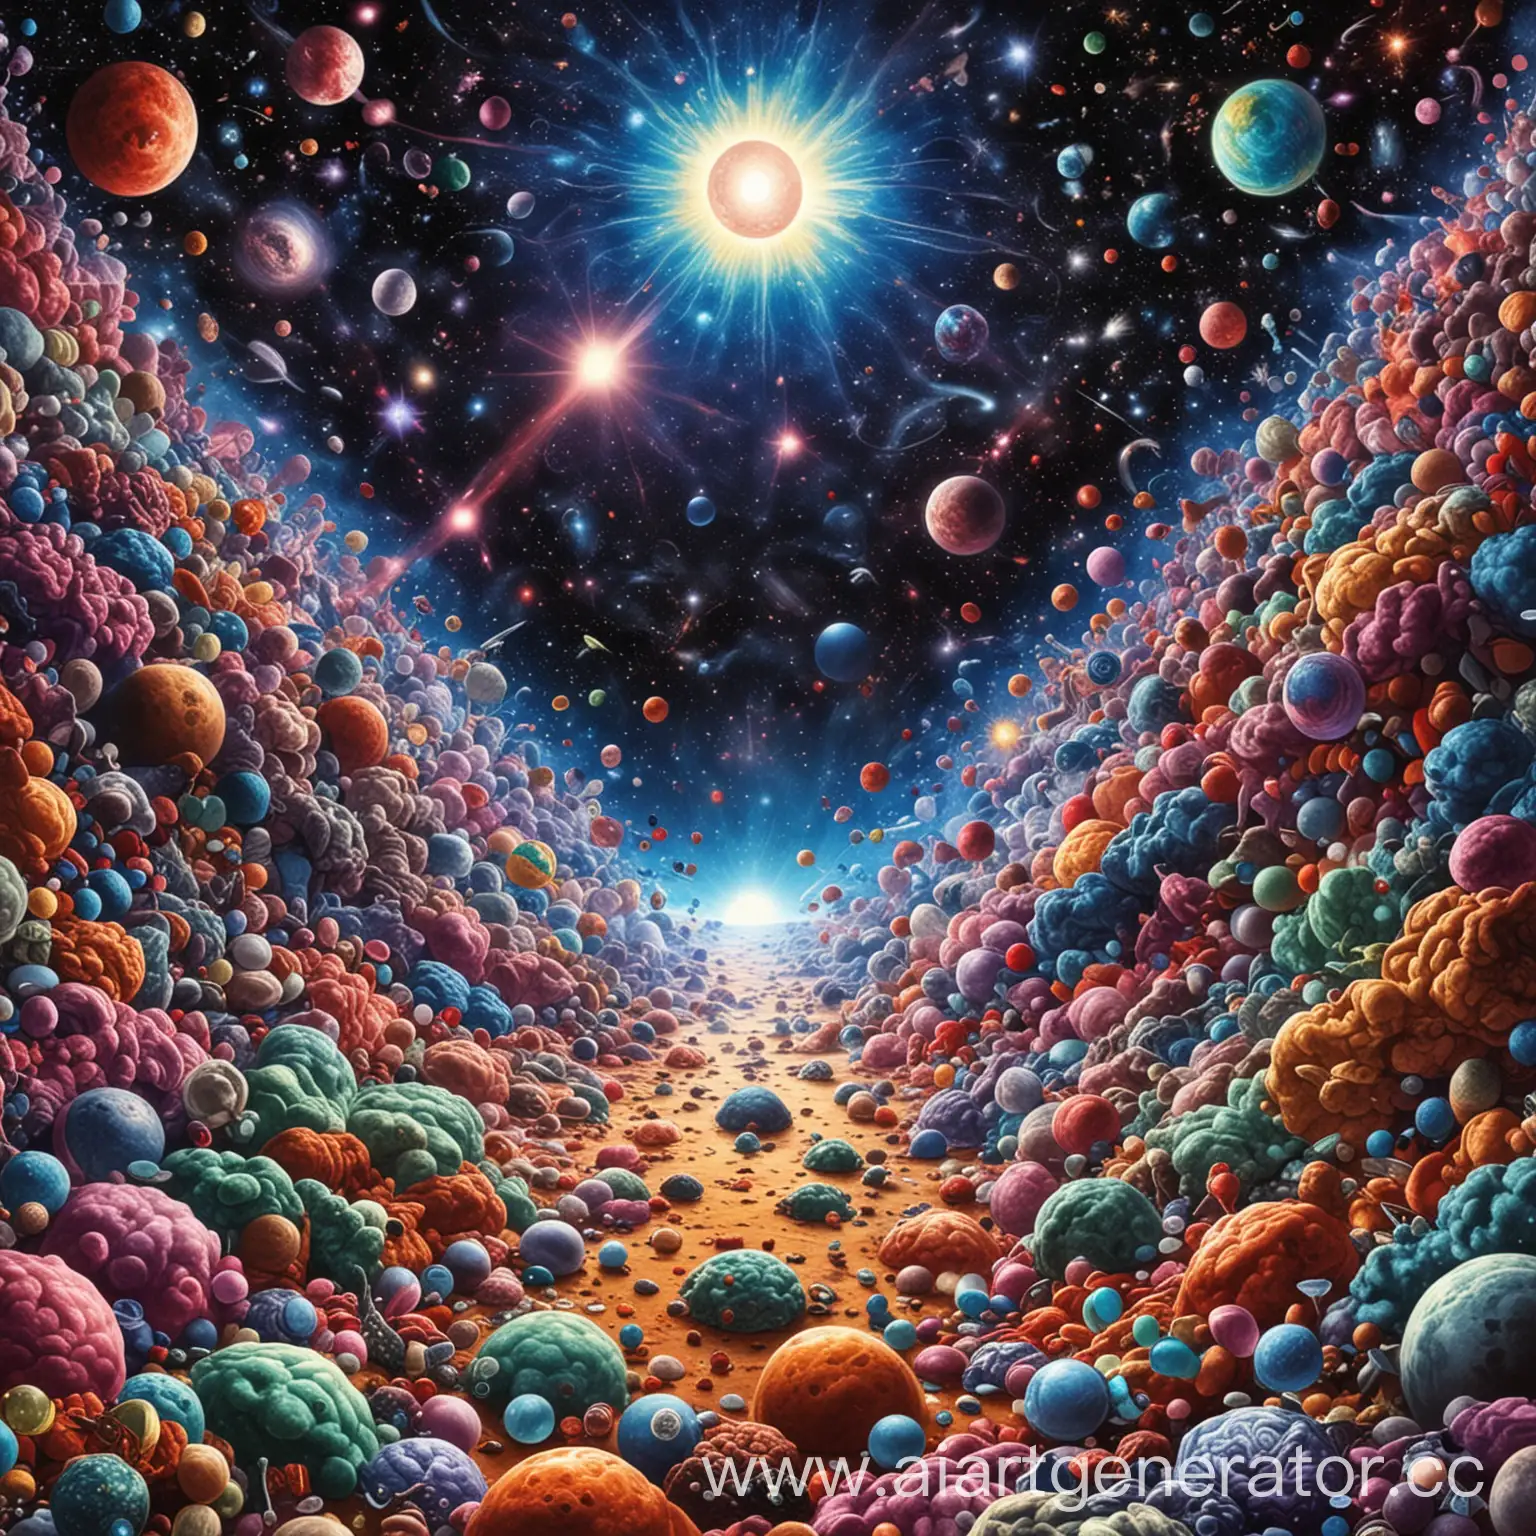 Psychedelic-Universe-Exploration-Surreal-Cosmos-Altered-by-MindAltering-Substances